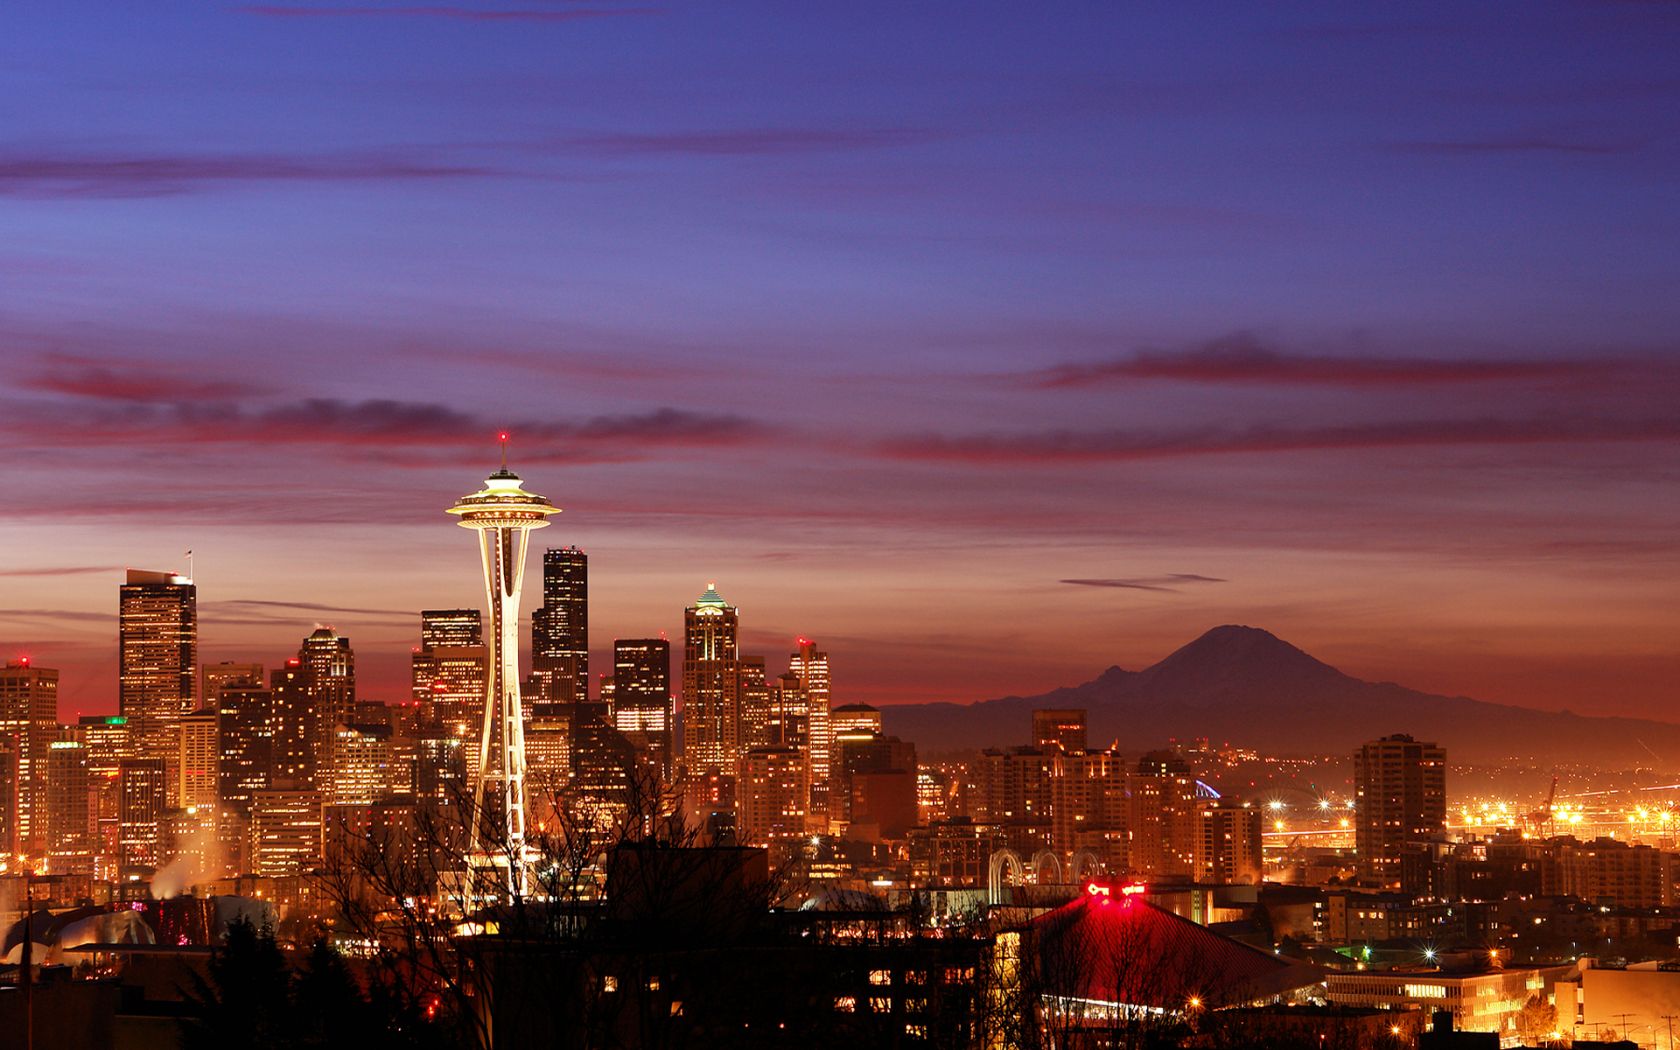 The Seattle skyline at night with the Space Needle and Mount Rainier in the background. - Skyline